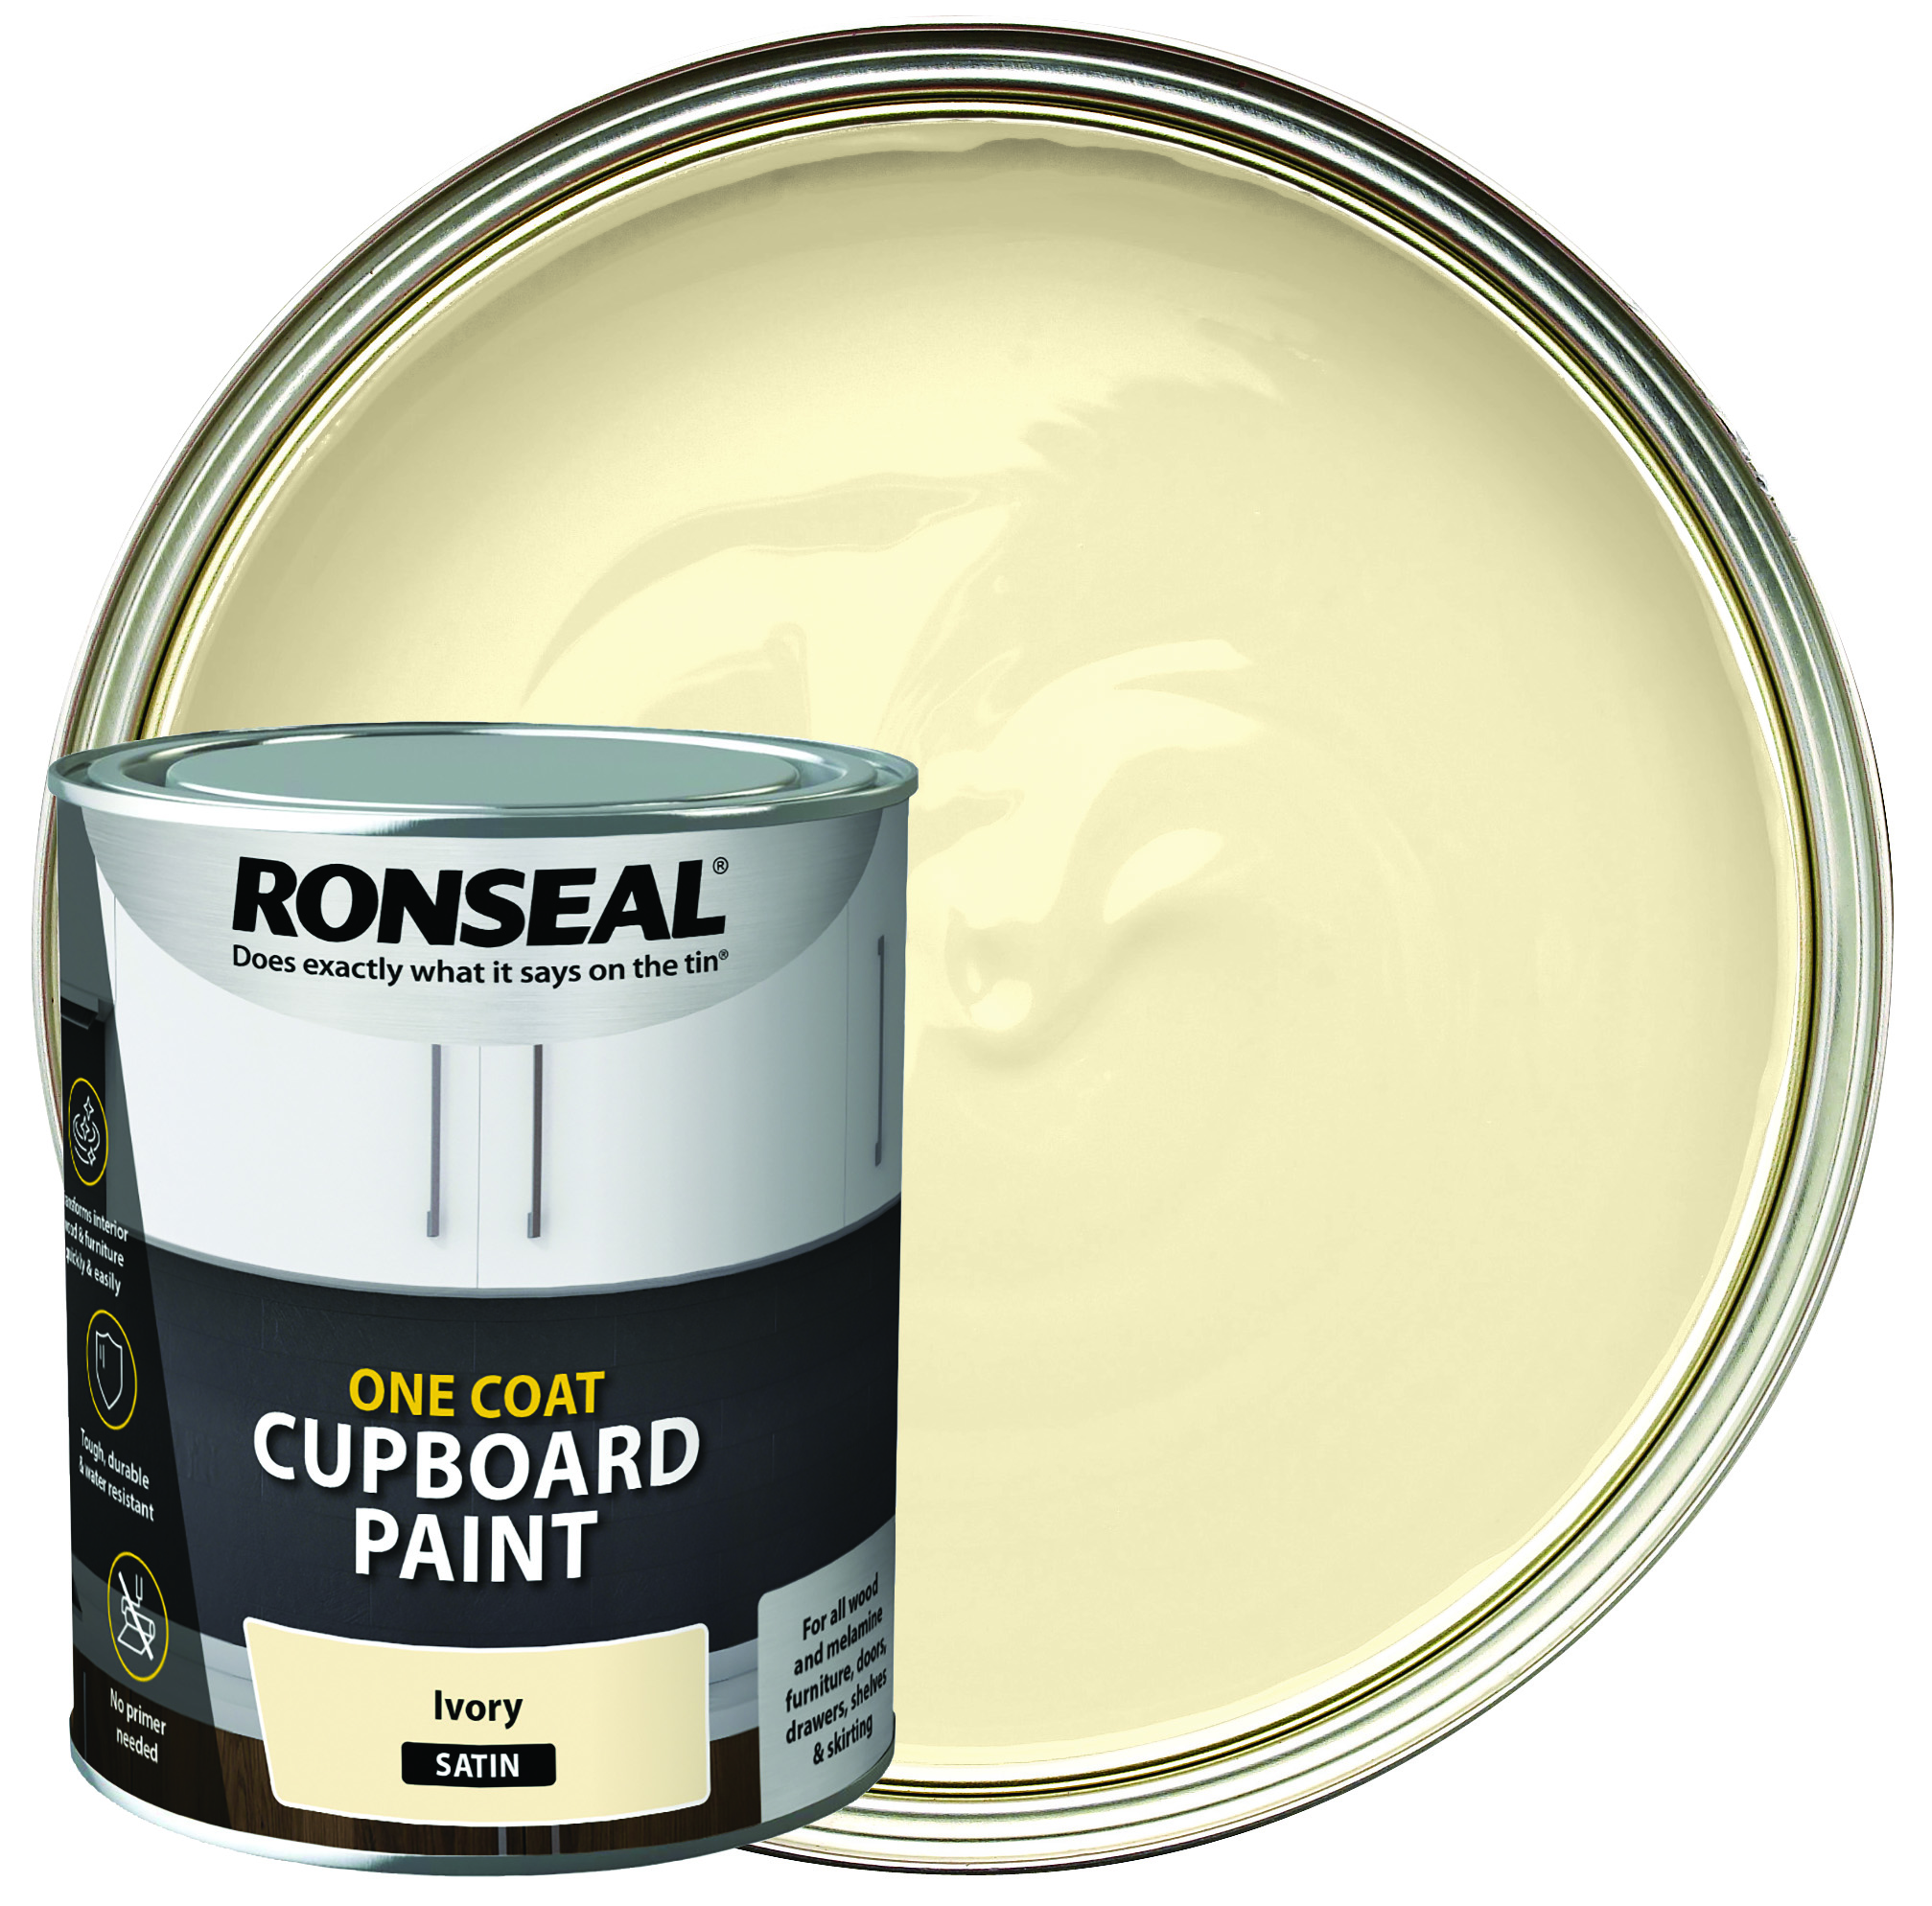 Image of Ronseal One Coat Cupboard & Melamine Paint - Ivory Satin 750ml